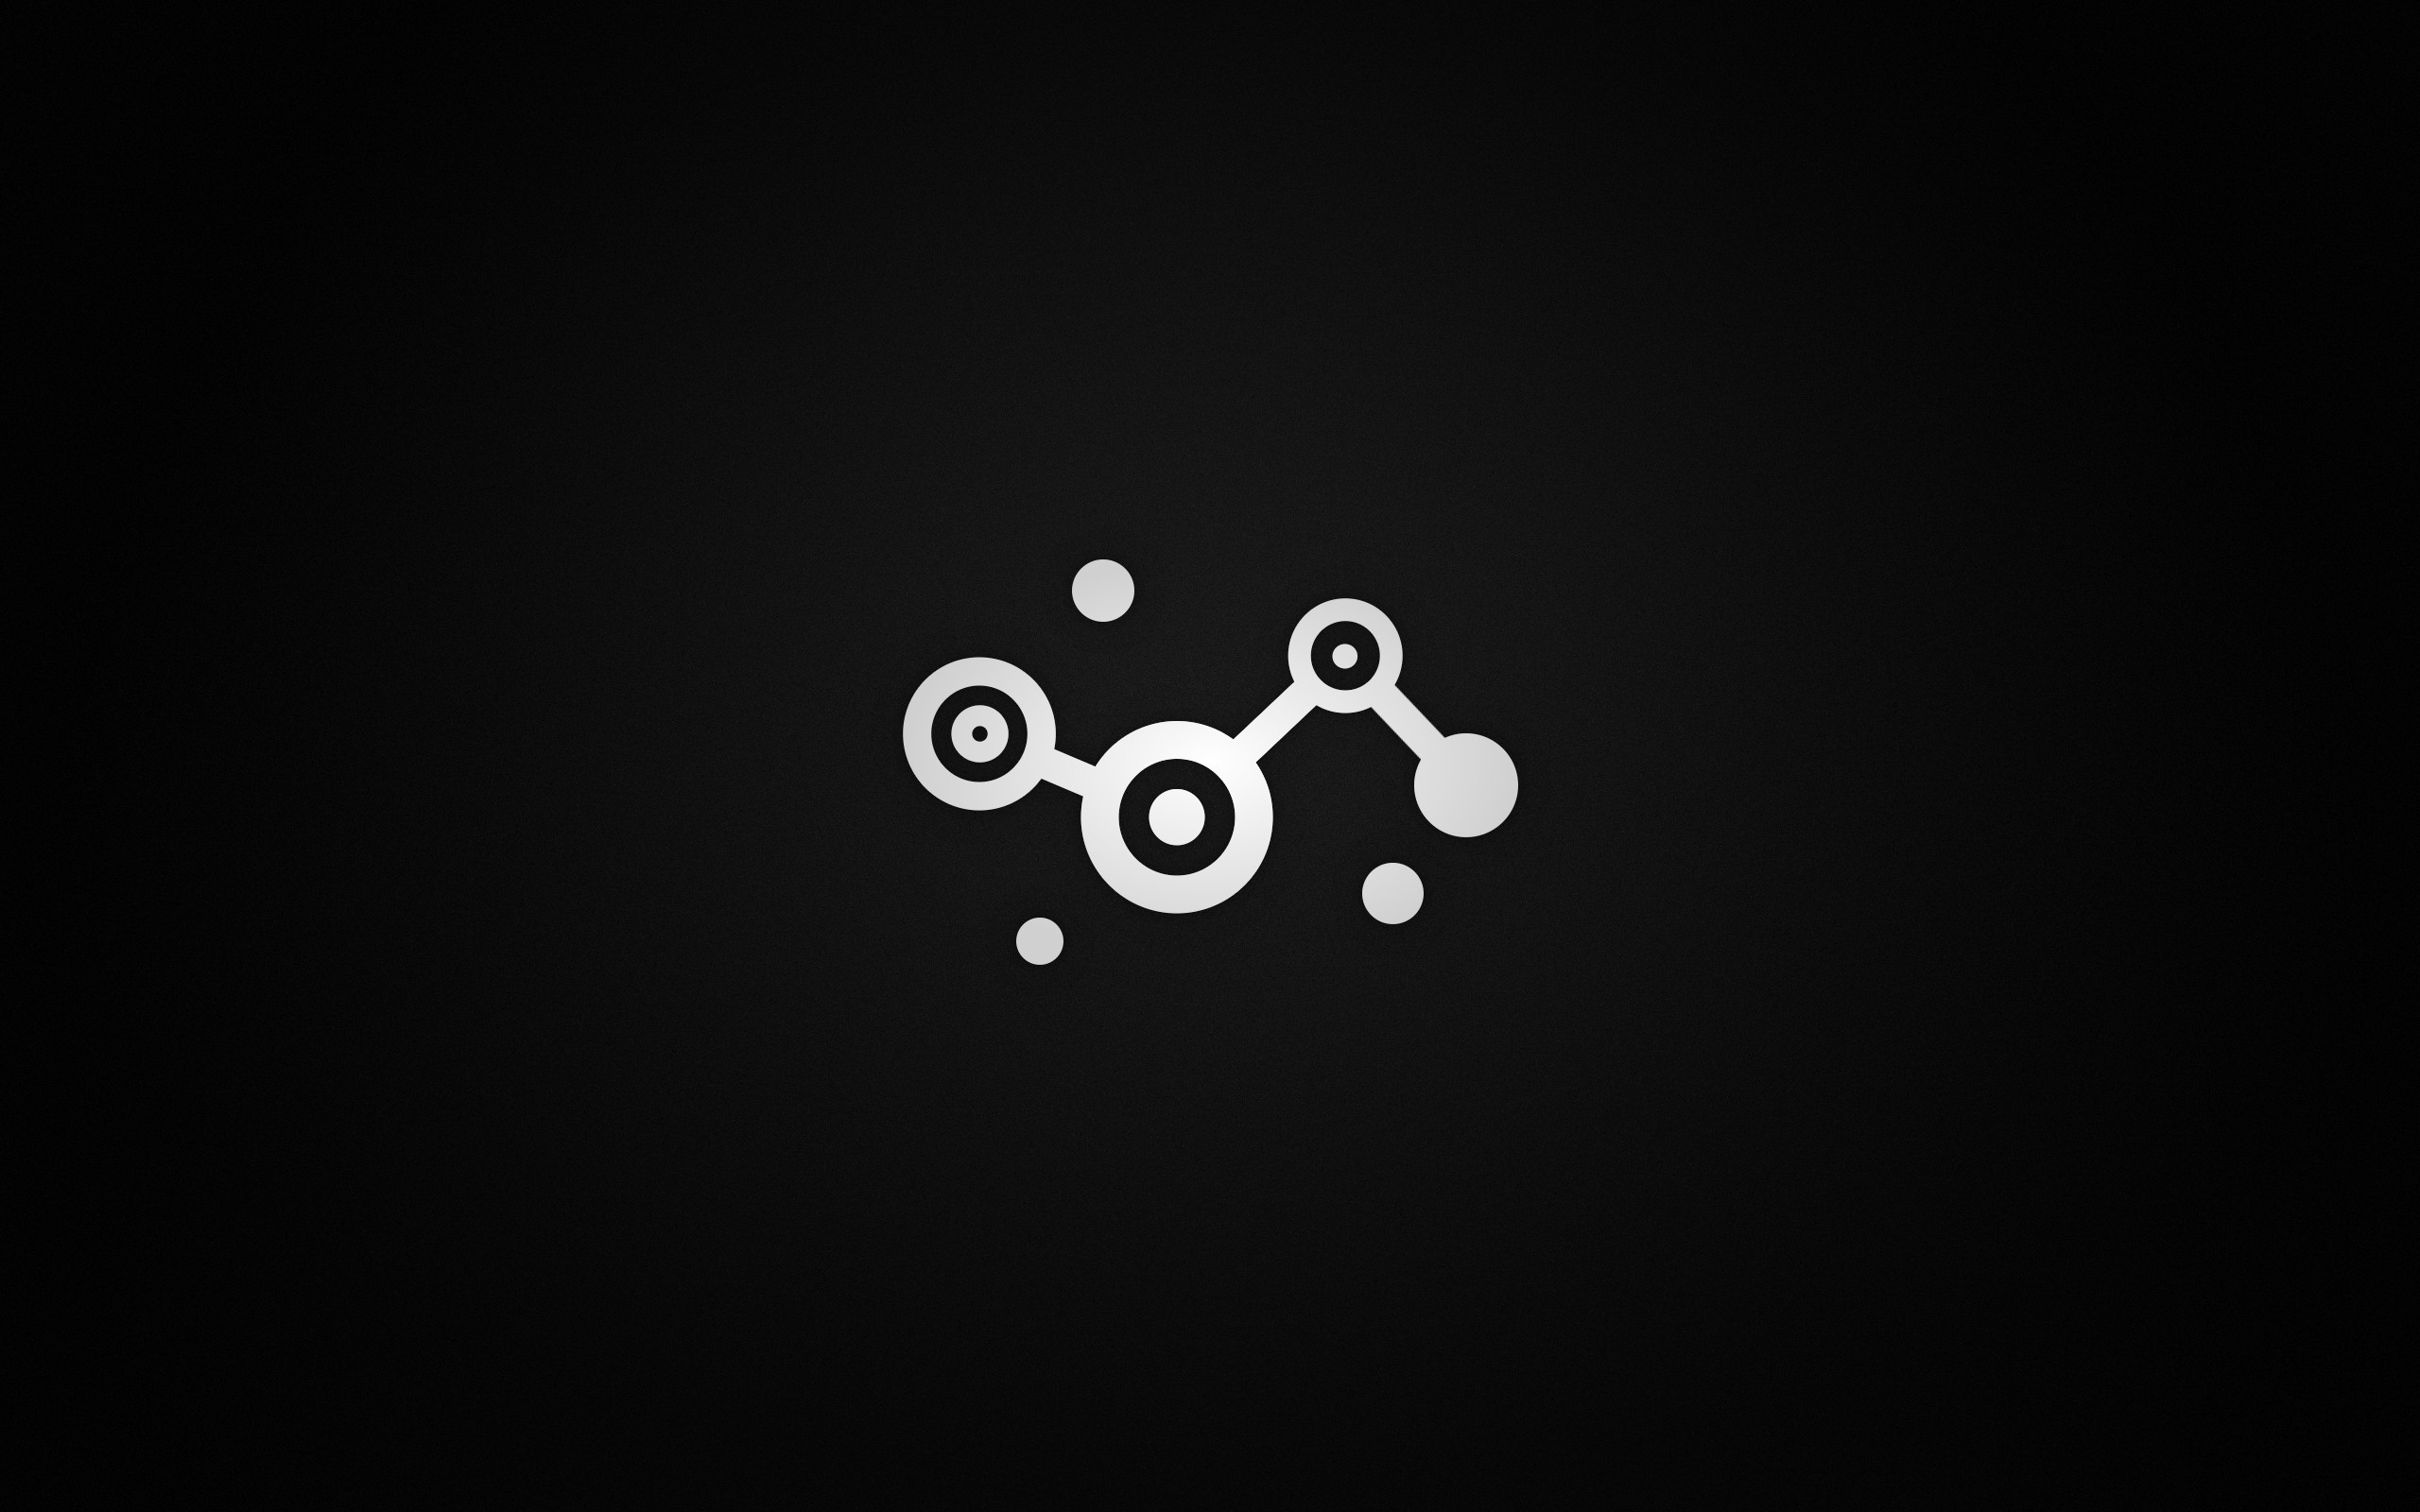 2560x1600 Steam Logo Minimalist HD Wallpaper. ImgPrix.com - High Definition Wallpapers  and Covers